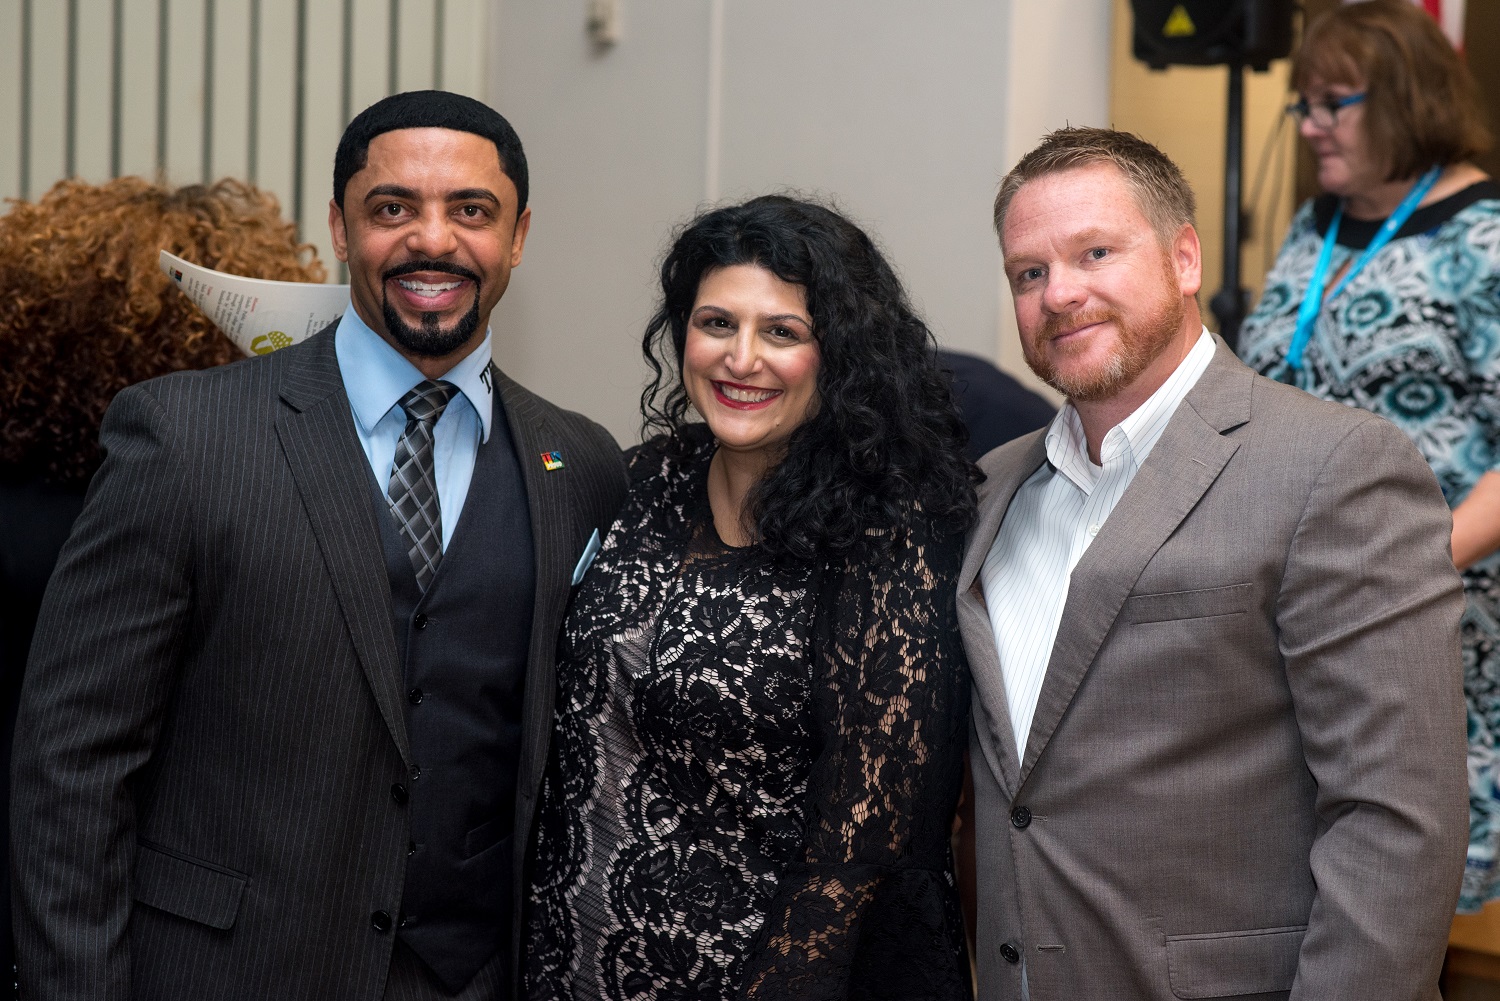 Pictured: Dr. Romules Durant, Superintendent/CEO, Toledo Public Schools, Mona Al-Hayani, and Kevin Dalton, President of the Toledo Federation of Teachers Photo Credit: Toledo Public Schools